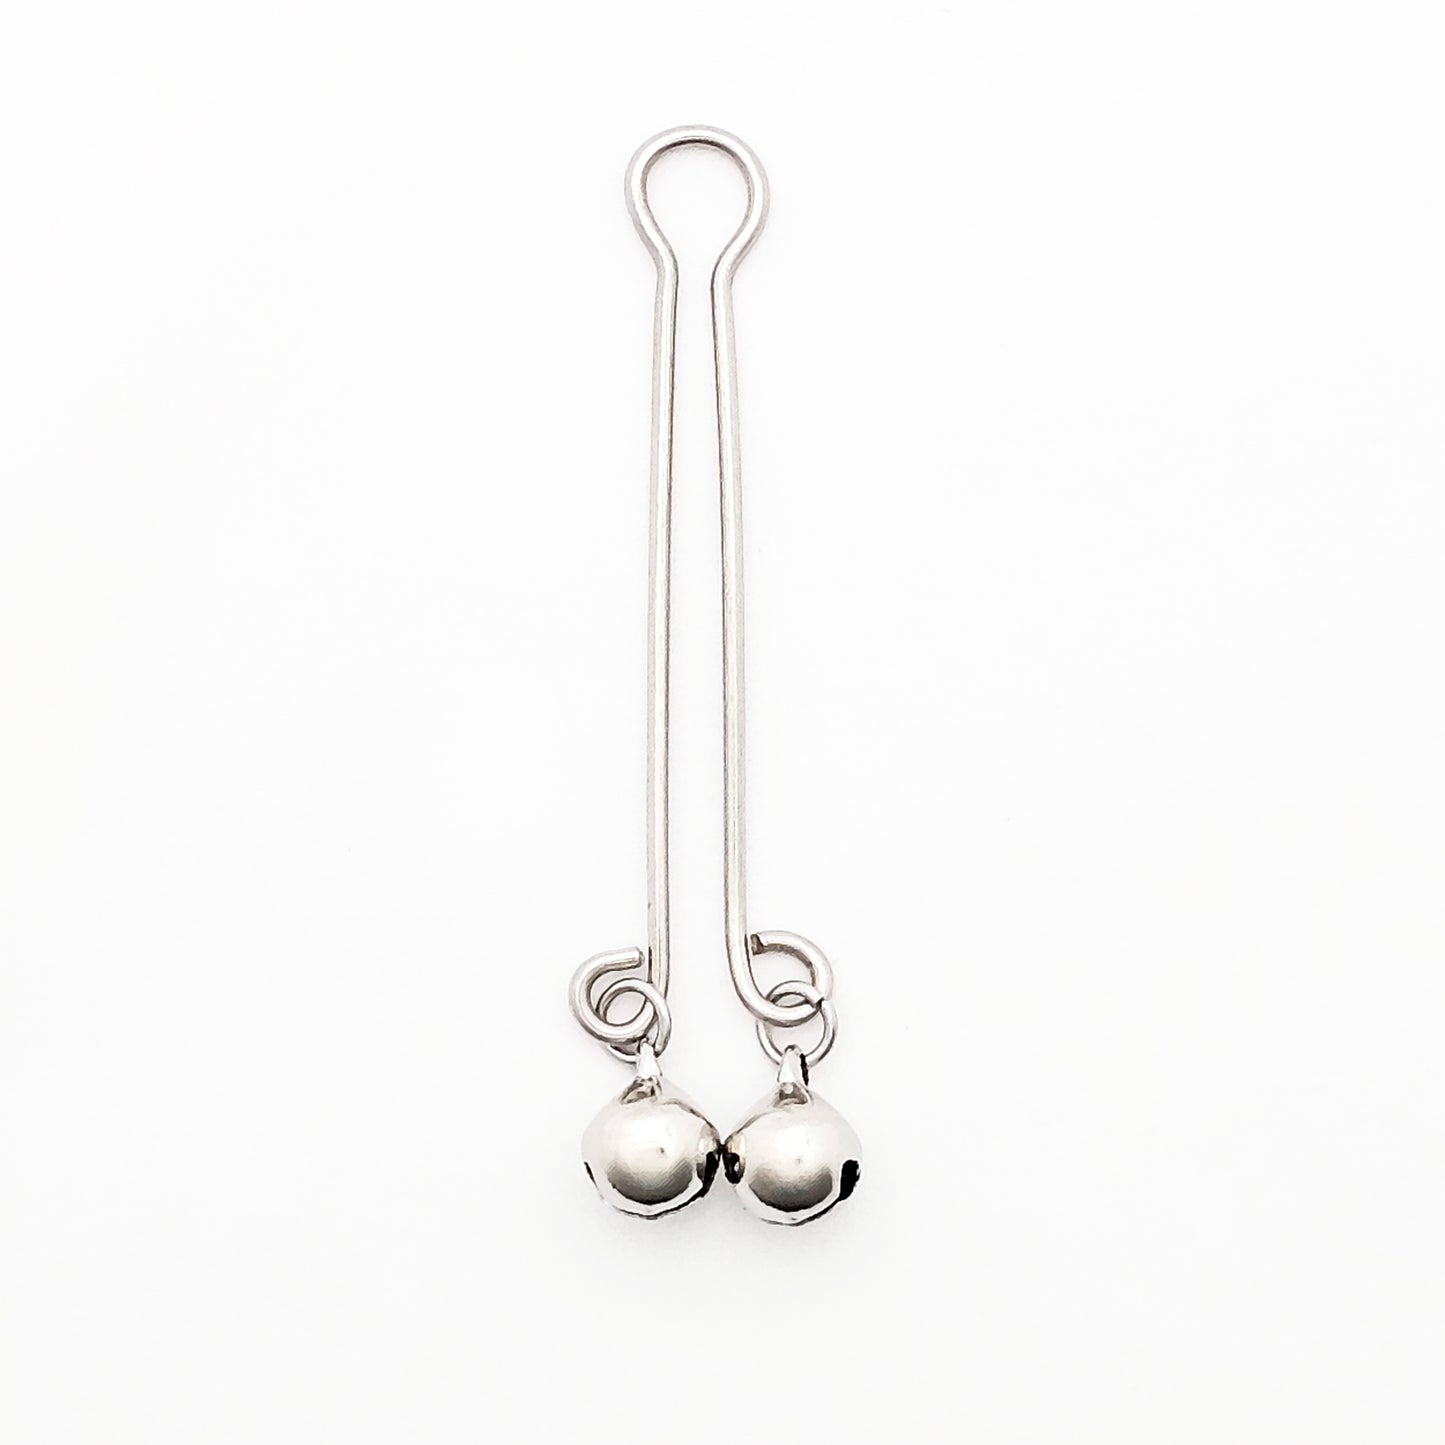 Labia Clip with Bells, Stainless Steel. Non Piercing Vaginal Jewelry, MATURE, BDSM